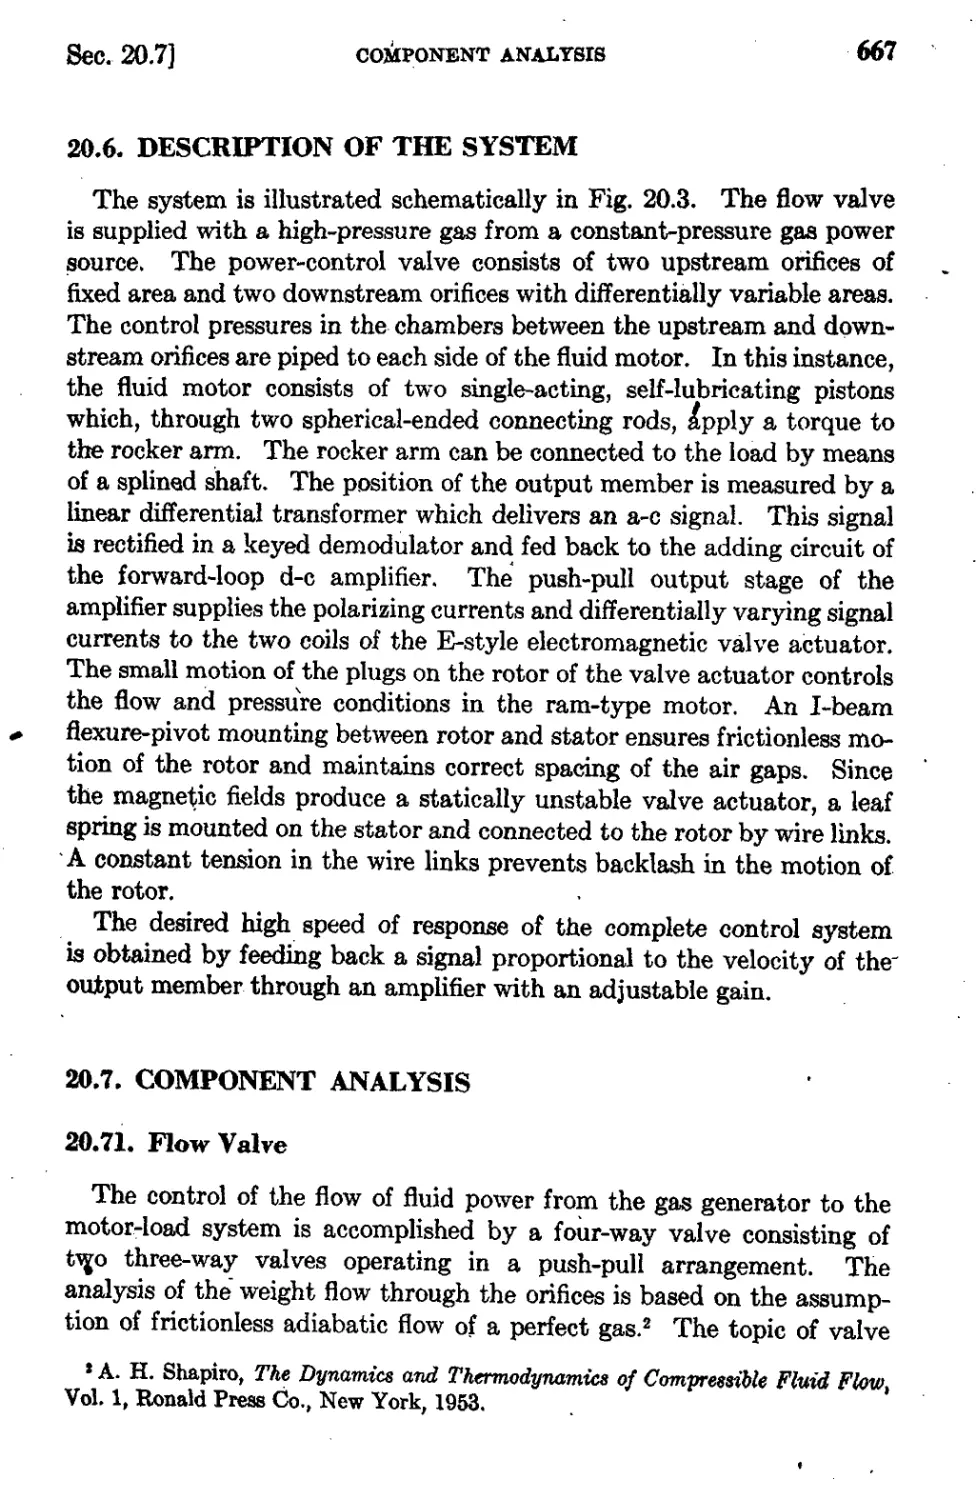 20.6 Description of the System
20.7 Component Analysis